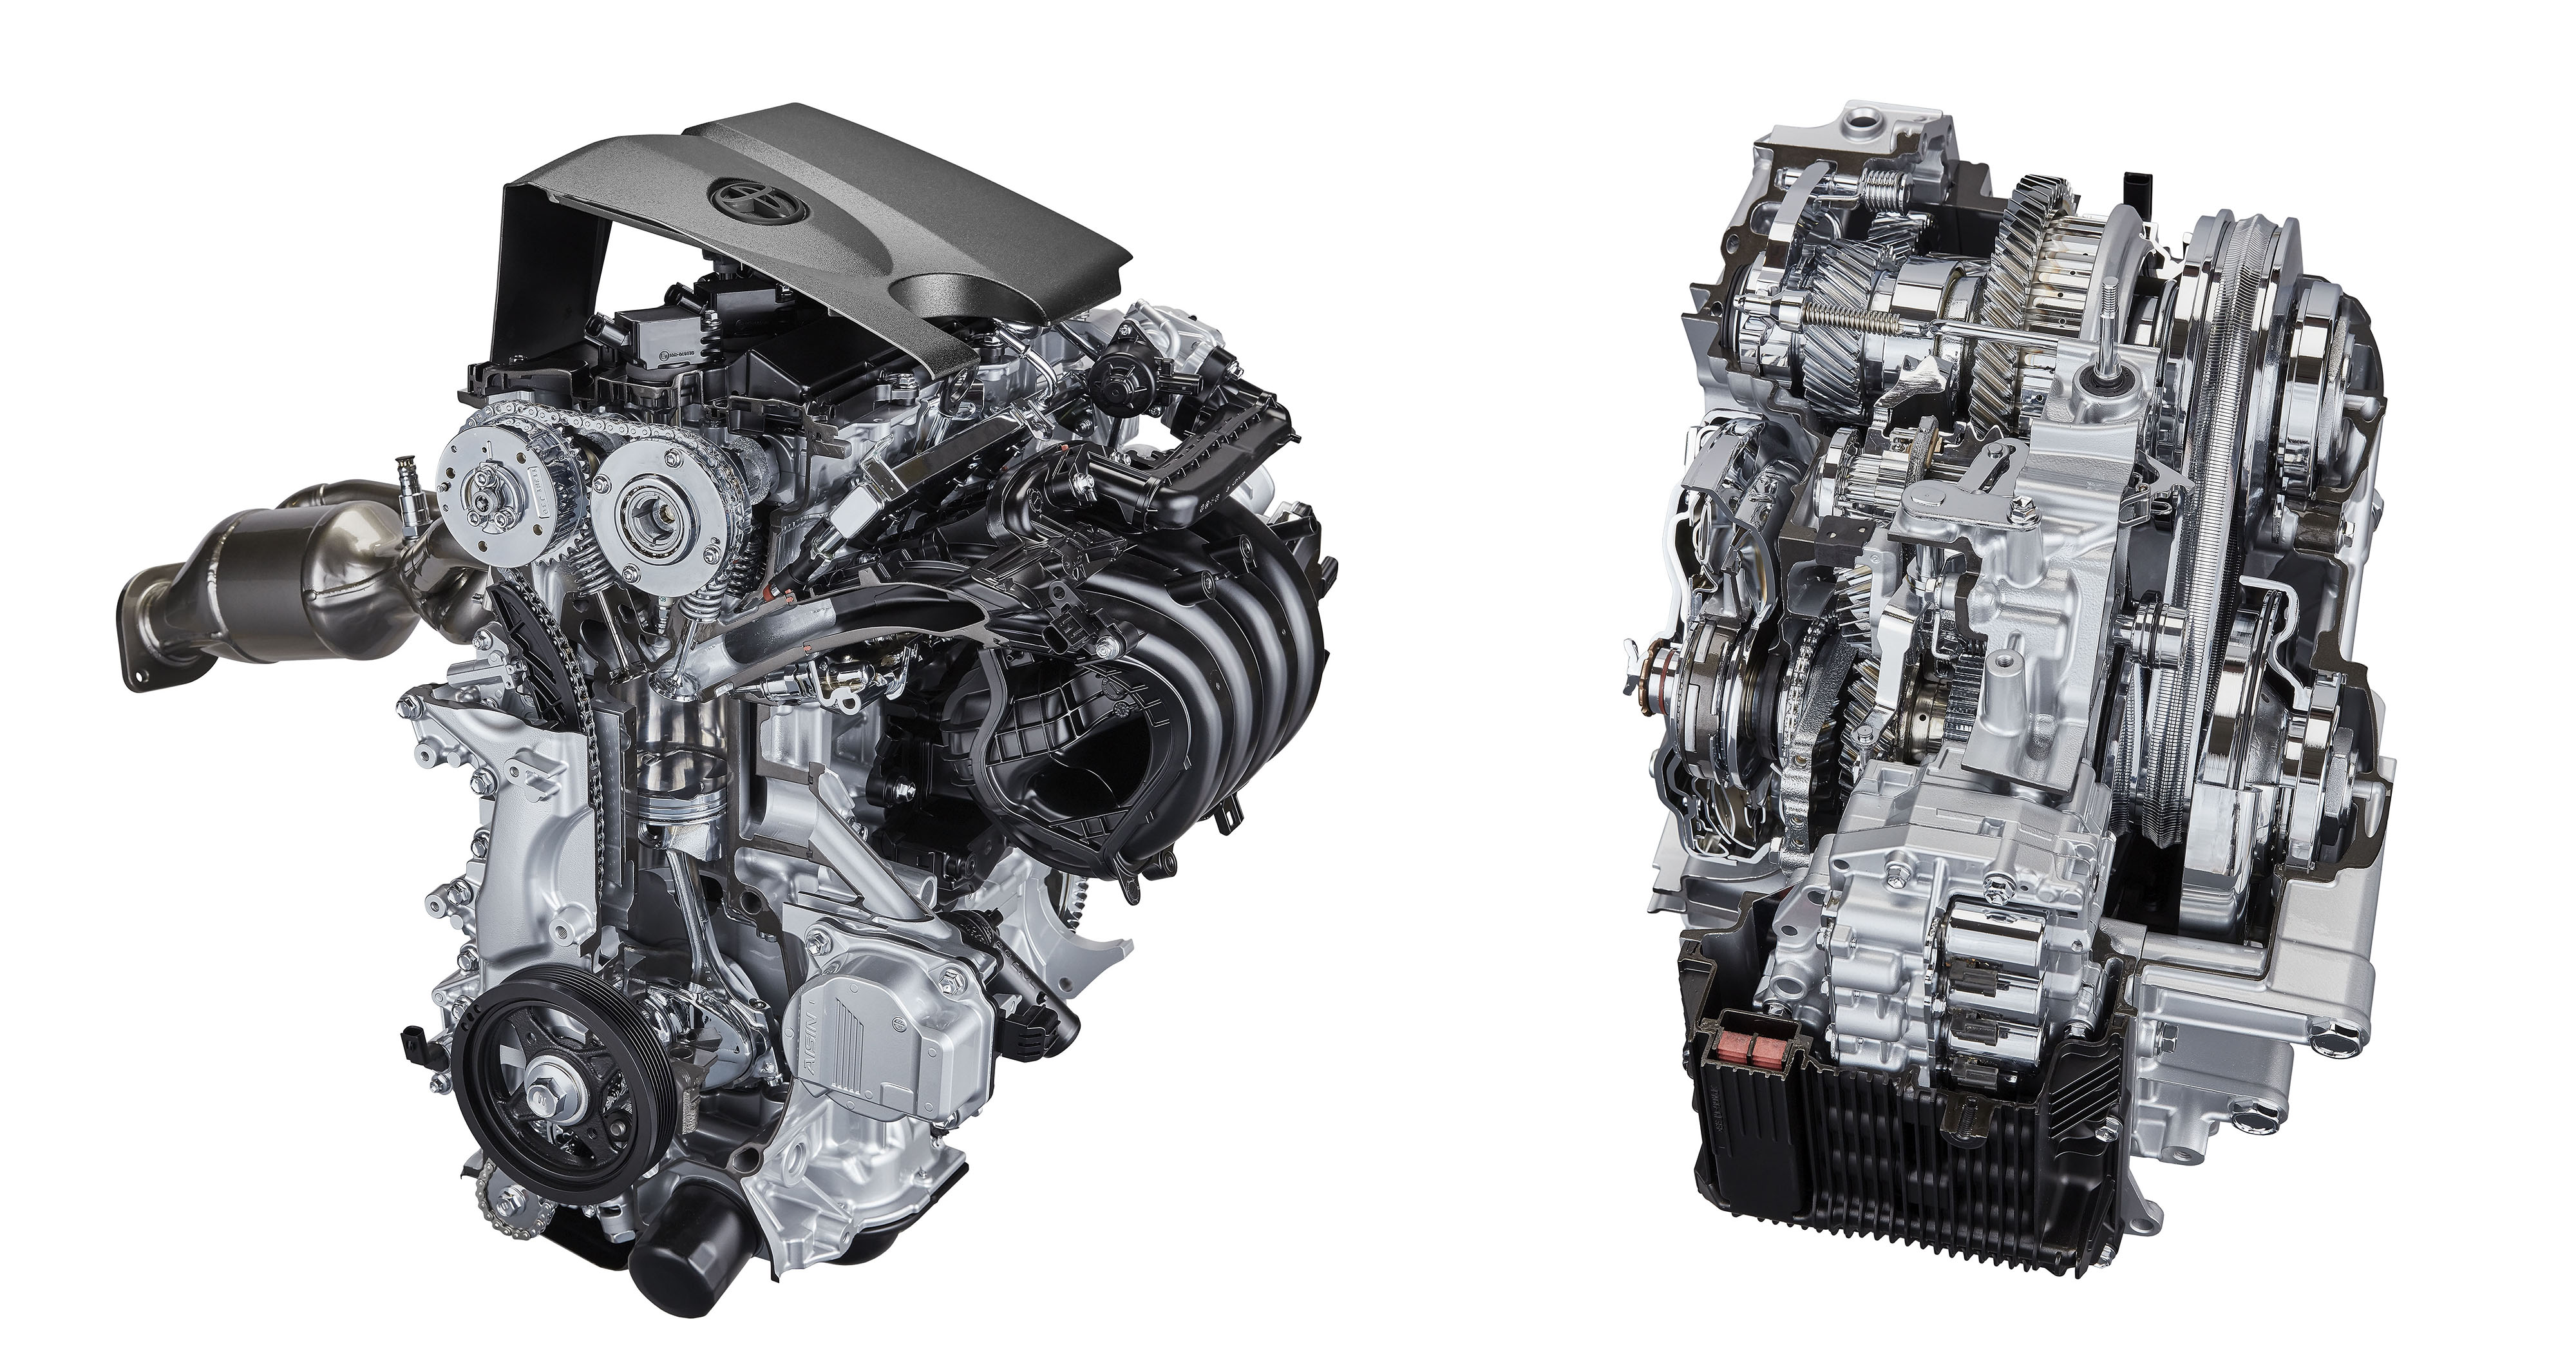 Toyota Reveals New 2 0l Dynamic Force Engine 2 0l Hybrid System Direct Shift Cvt 4wd Systems Paultan Org